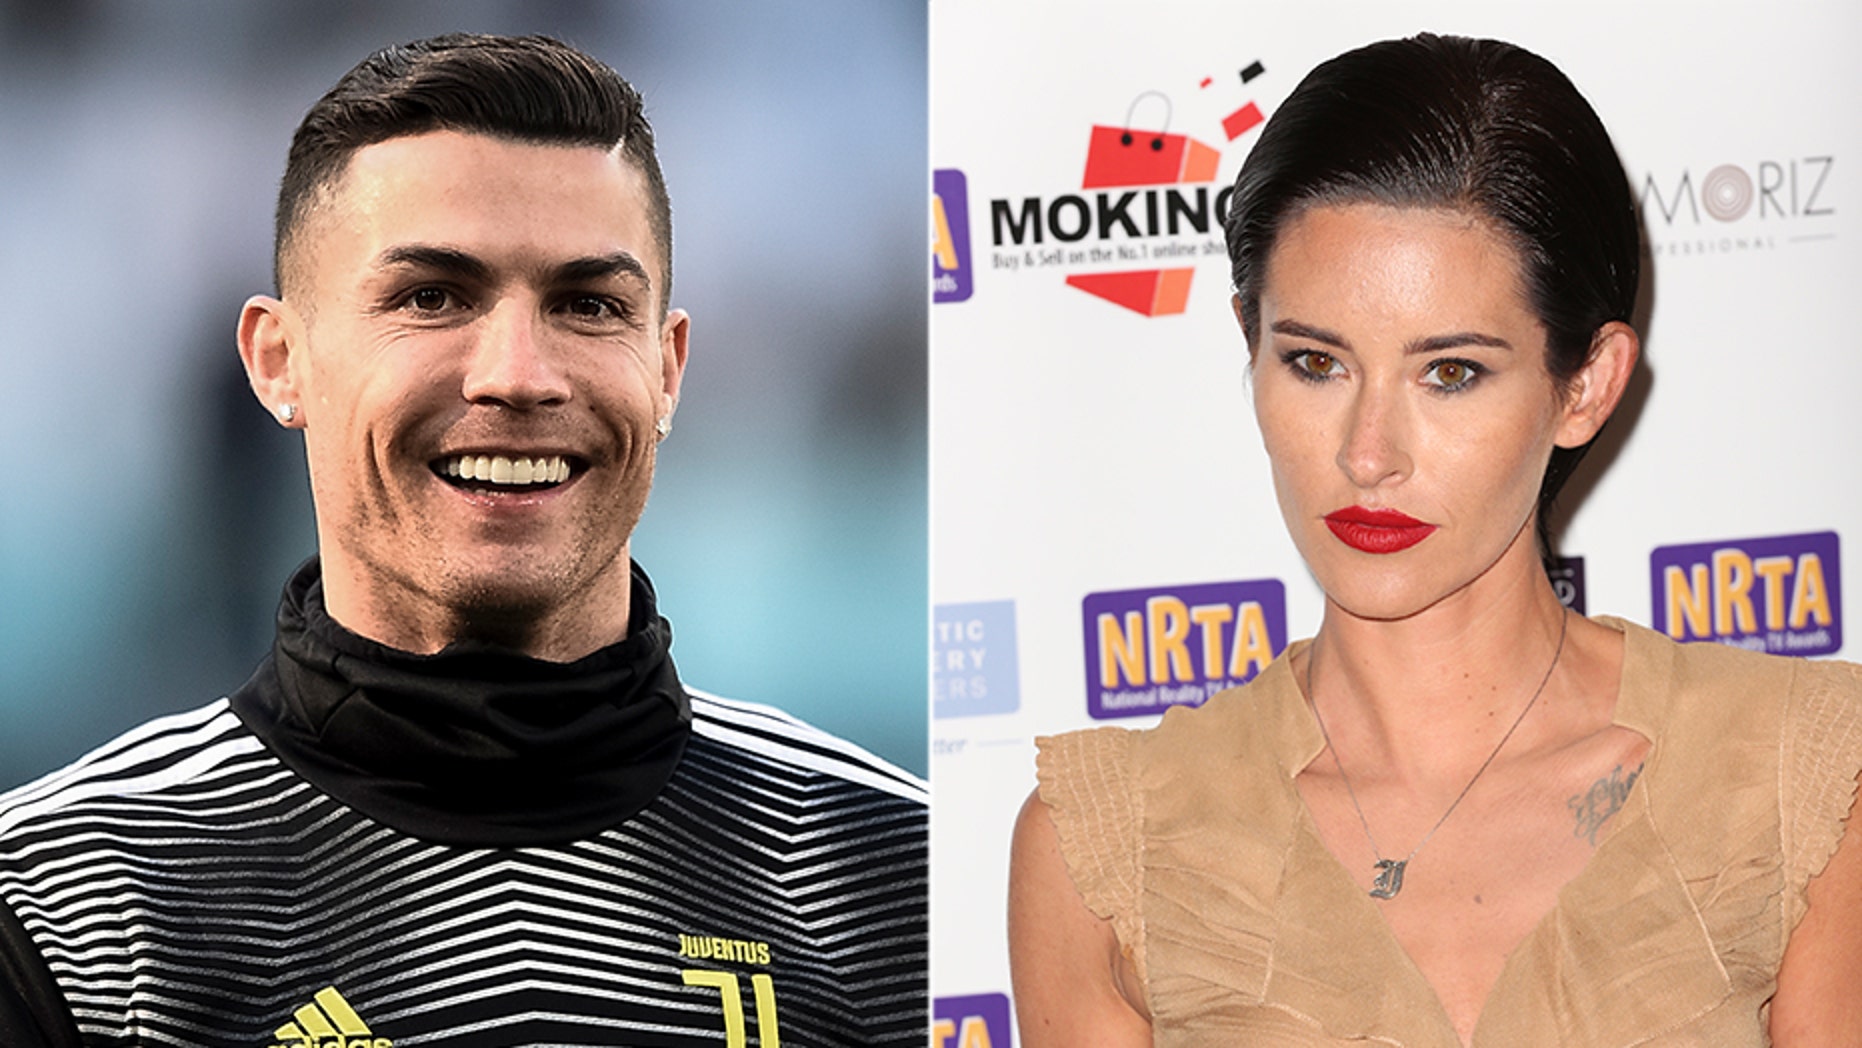 Cristiano Ronaldo threatened to ‘have my body cut up,’ Celebrity Big Brother star claims